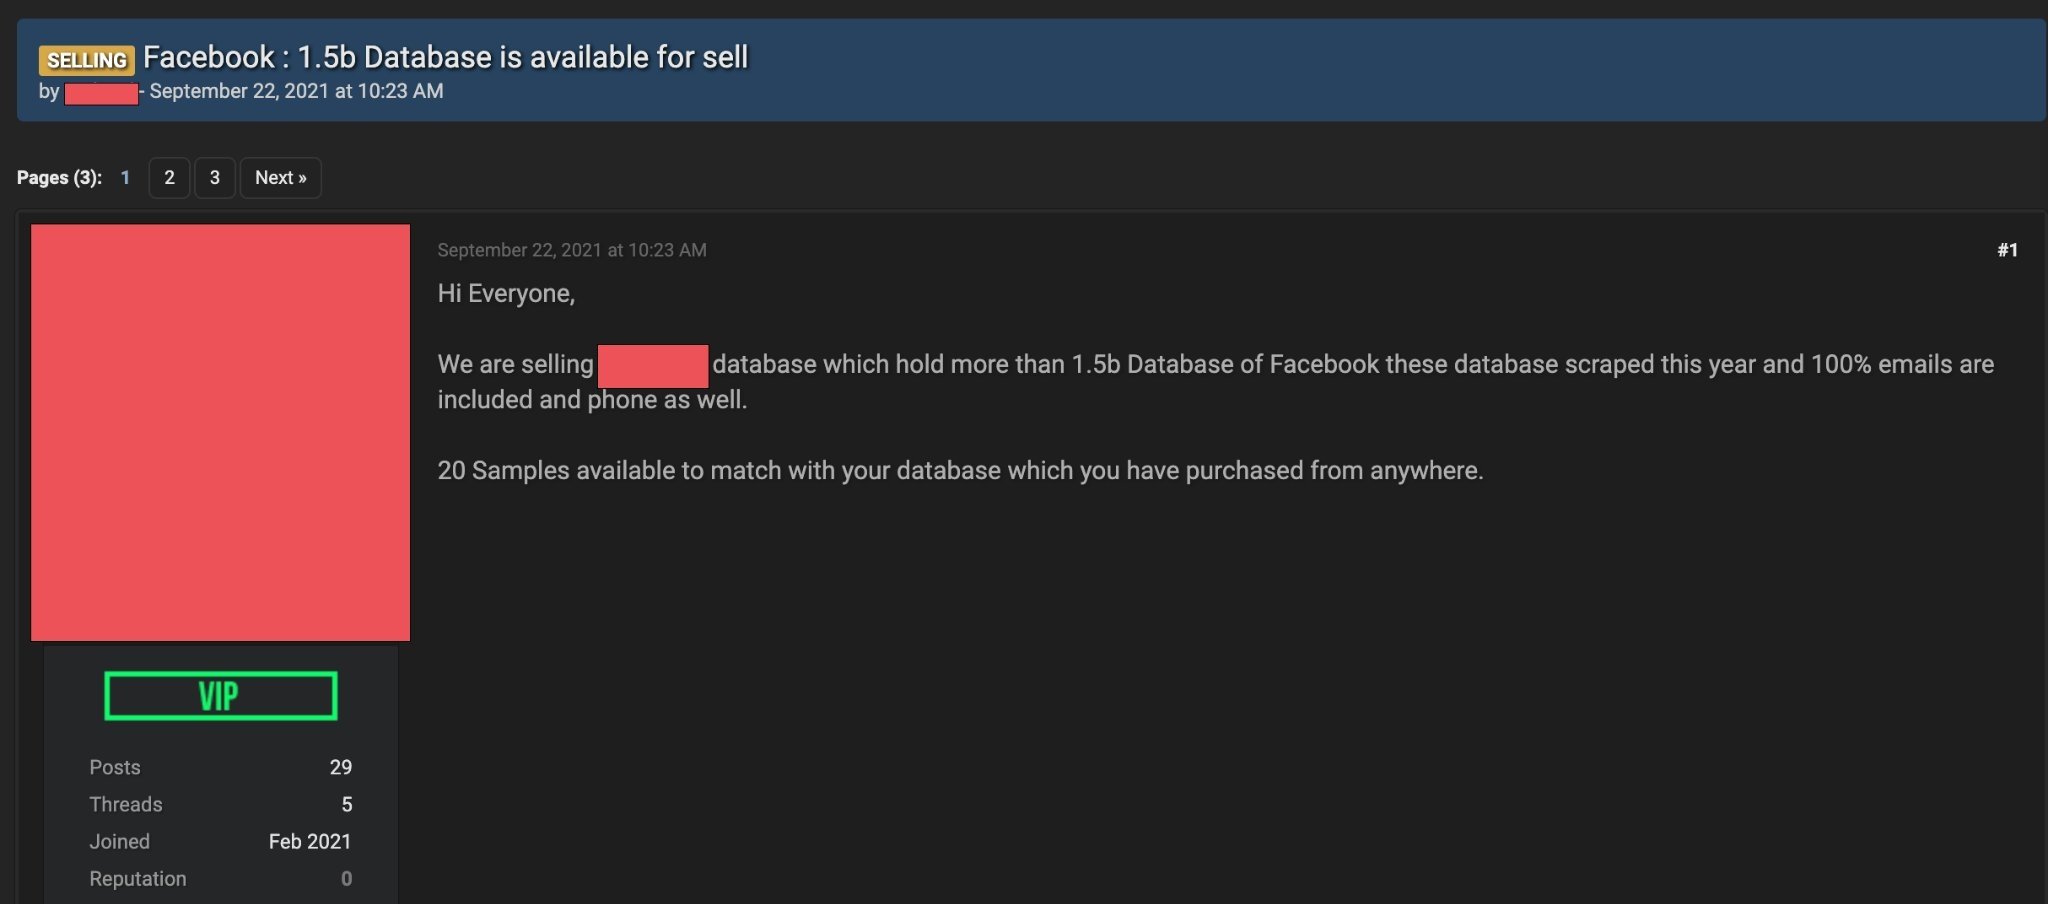 A screenshot allegedly showing a post on the dark web for the sale of over 1.5 billion Facebook users' data.